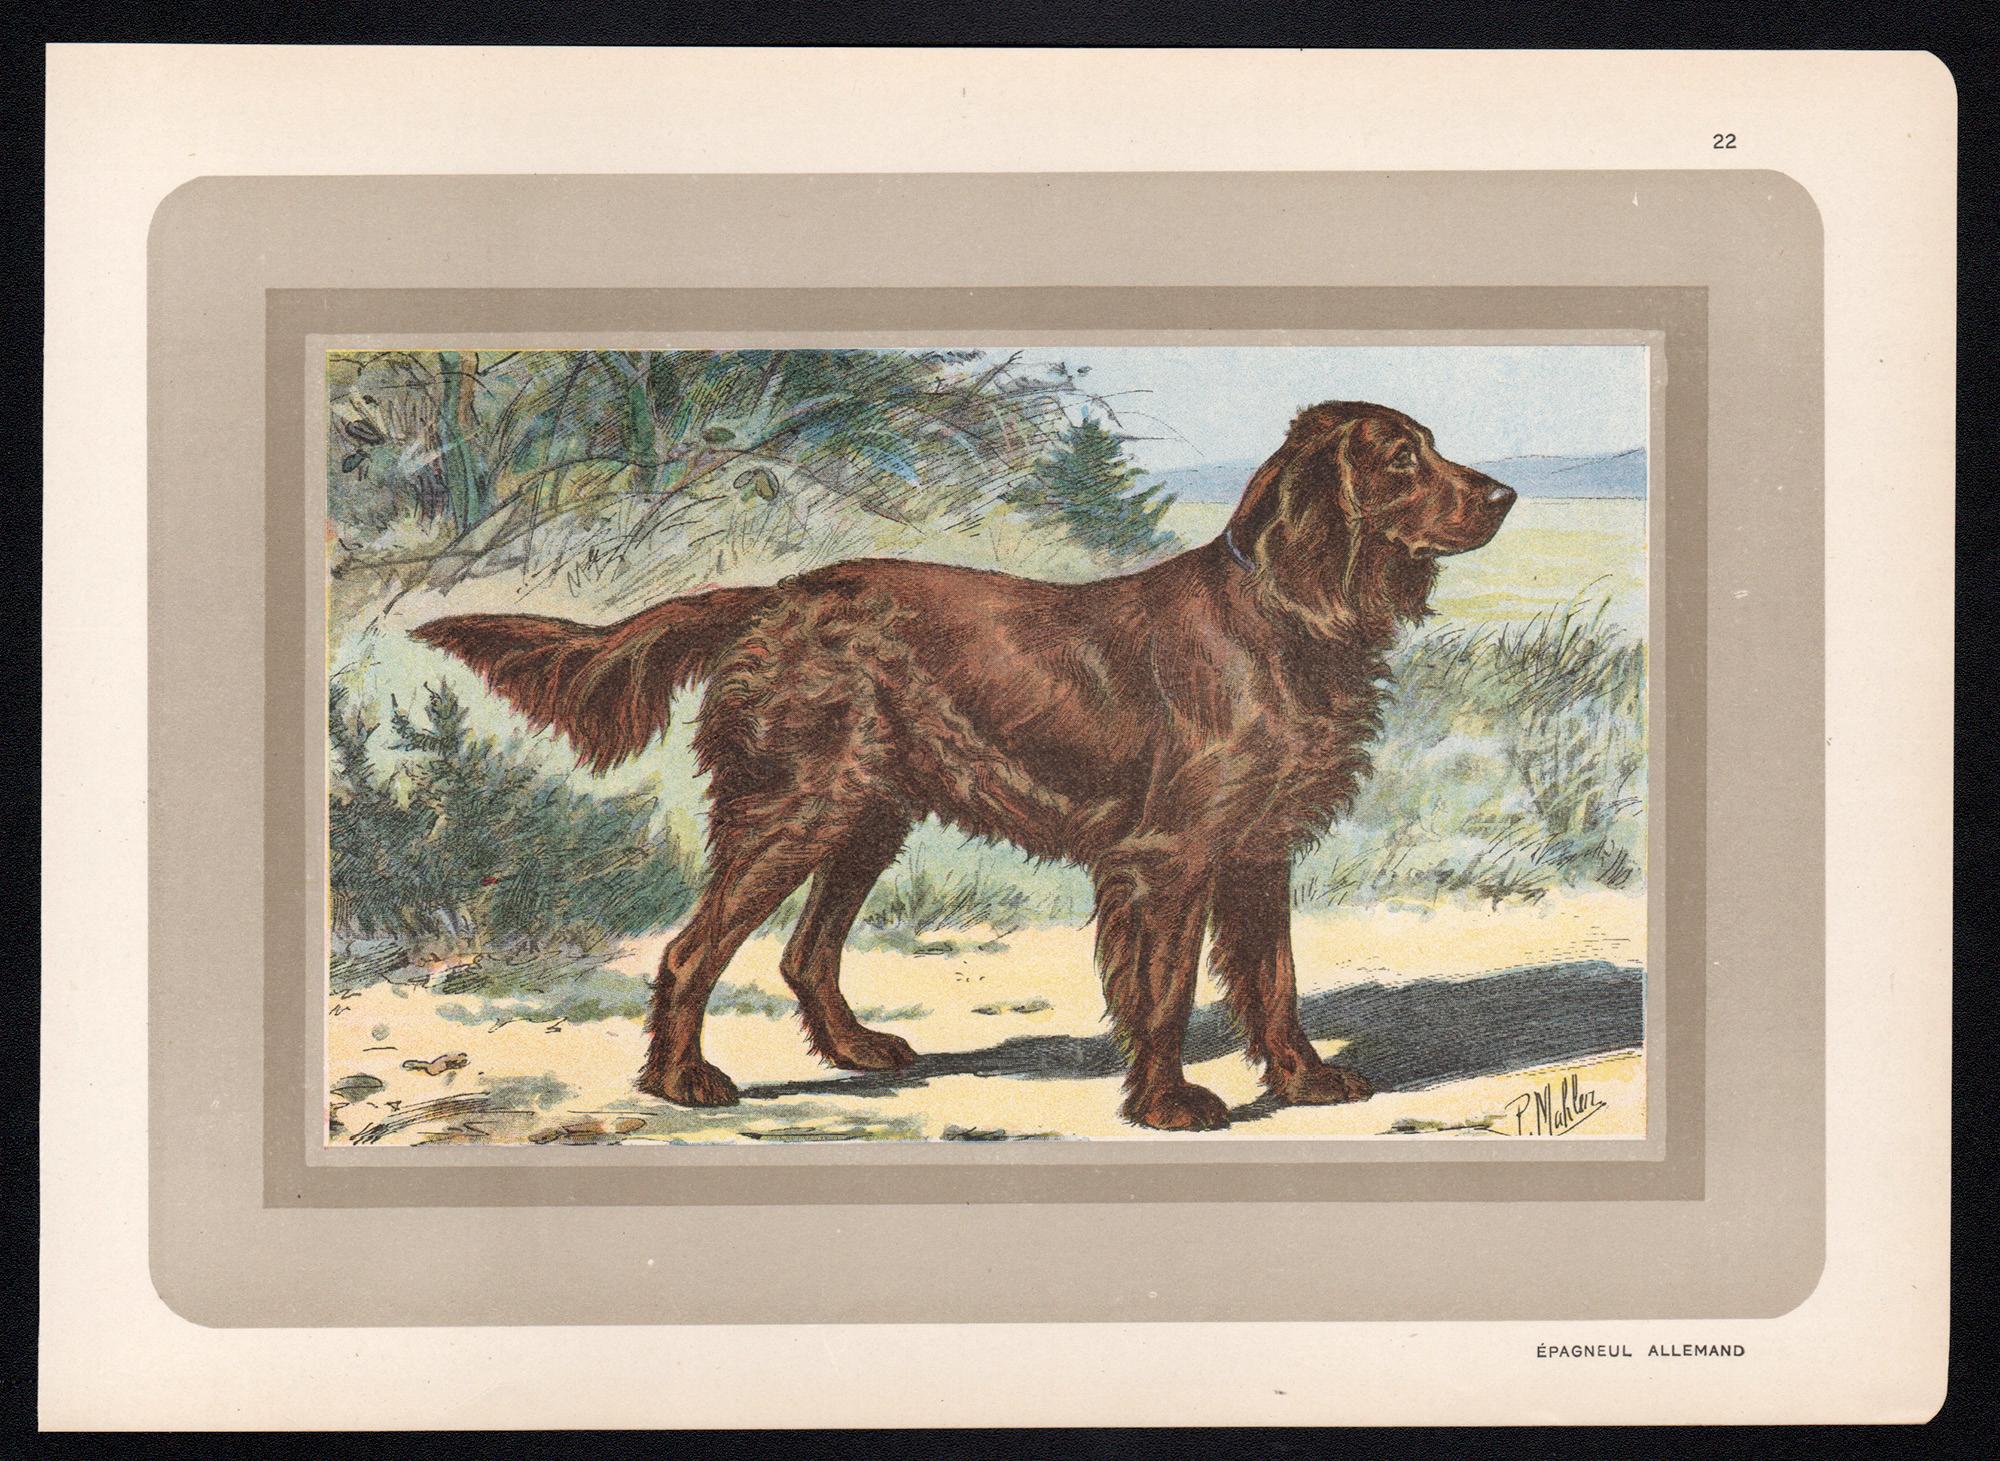 Epagneul Allemand - German Spaniel, French hound, dog chromolithograph, 1930s - Print by P. Mahler